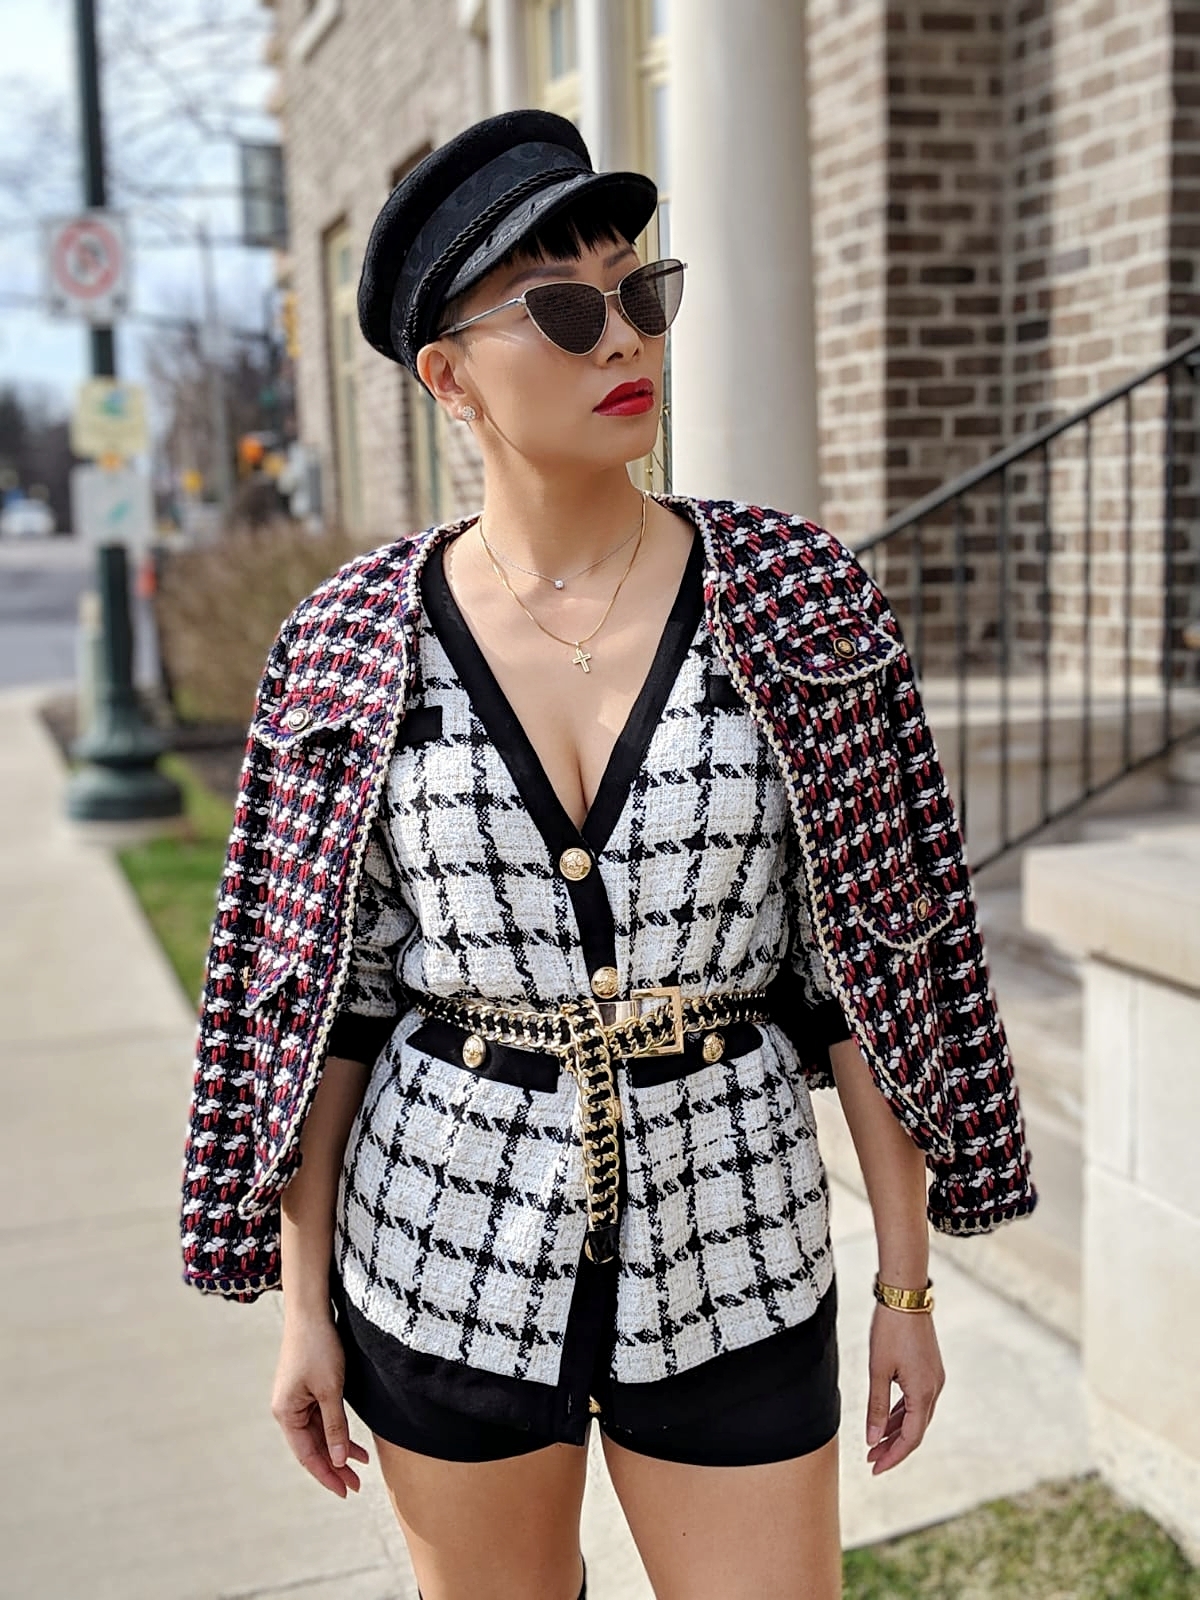 HOW TO GET CHANEL-INSPIRED LOOK ON A BUDGET